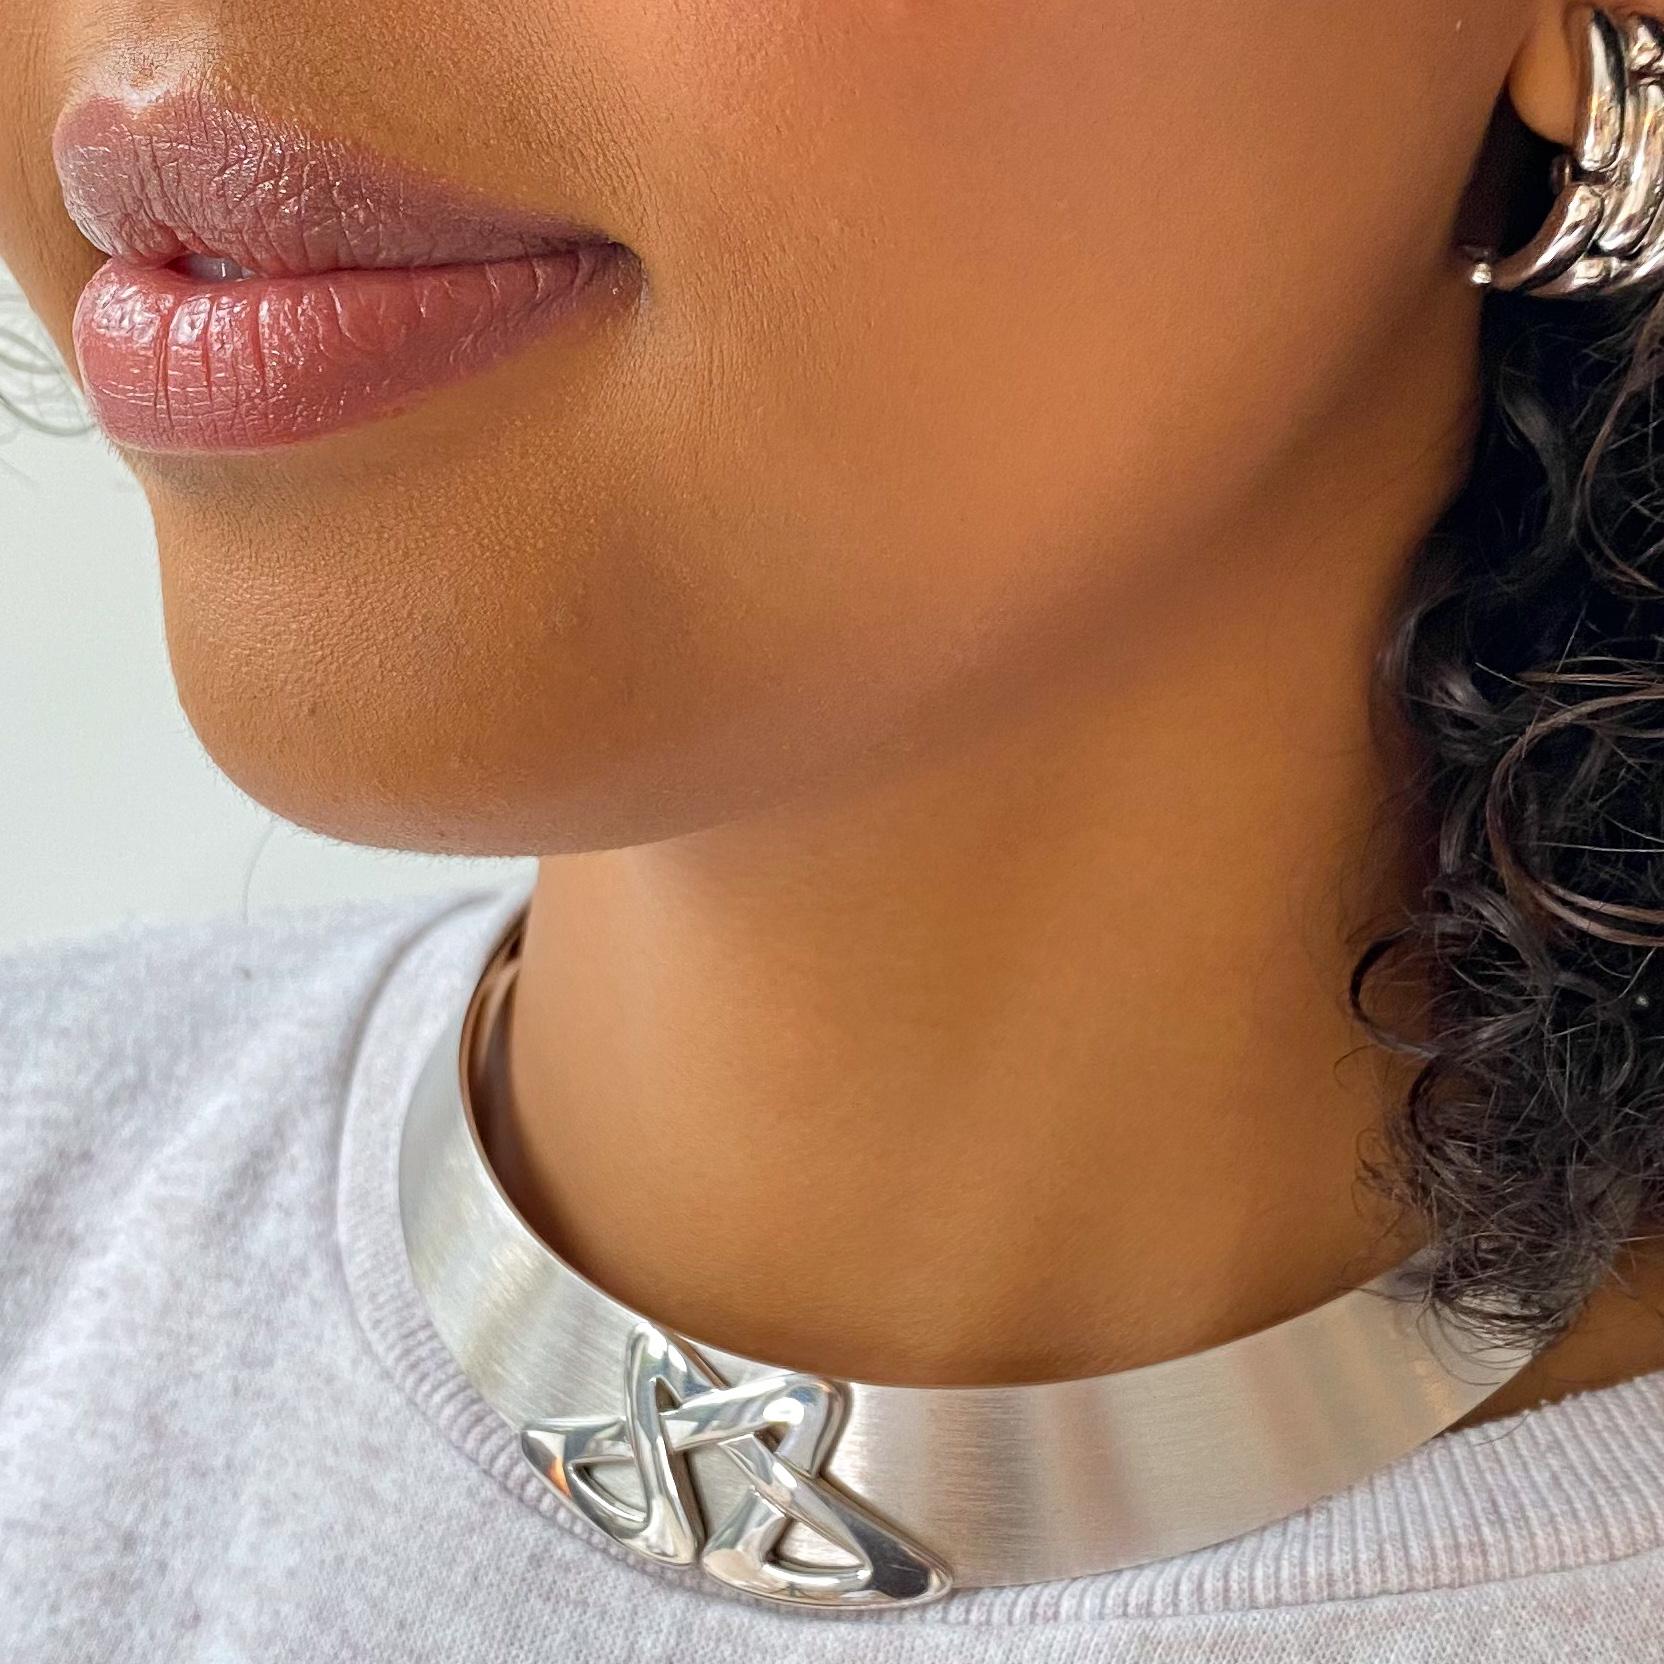 Nina Ricci Necklace Vintage Sterling Silver Choker

An incredible sterling silver collar necklace from the legendary French designer Nina Ricci. Made in the 1990s with 1970s styling with an abstract geometric take on the Nina Ricci initials